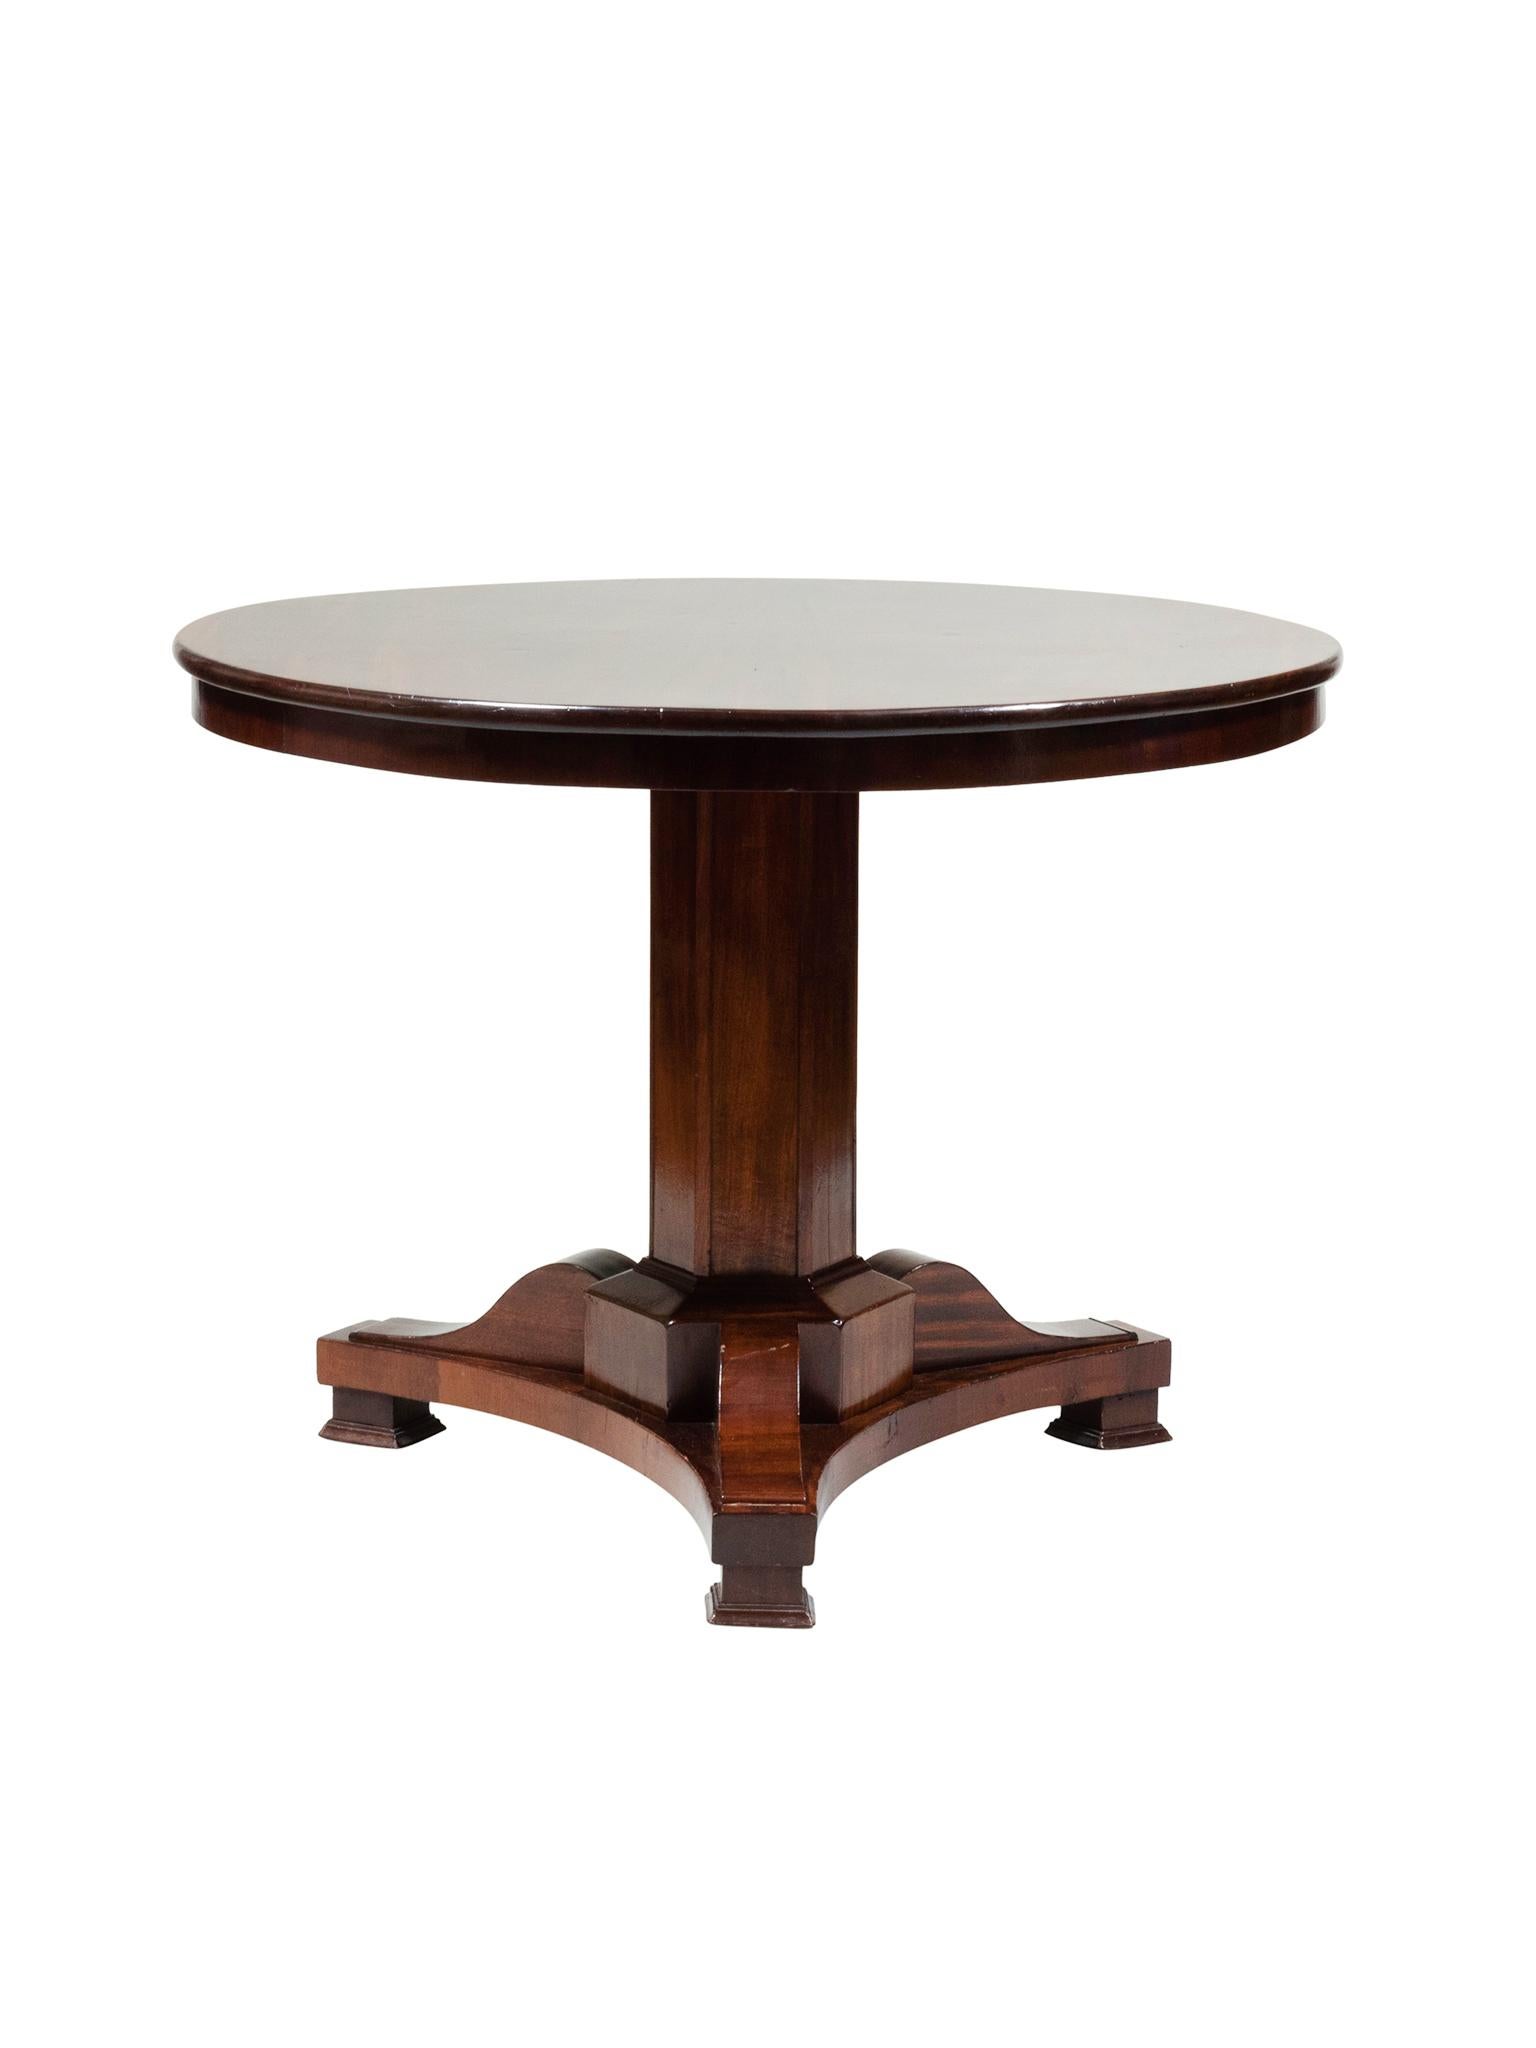 This round center table was made in the Early 20th Century in the Empire style. Its design is one of symmetry and balance: a classic circle atop a pedestal base. The mahogany wood has a warm red-brown tone and has been recently